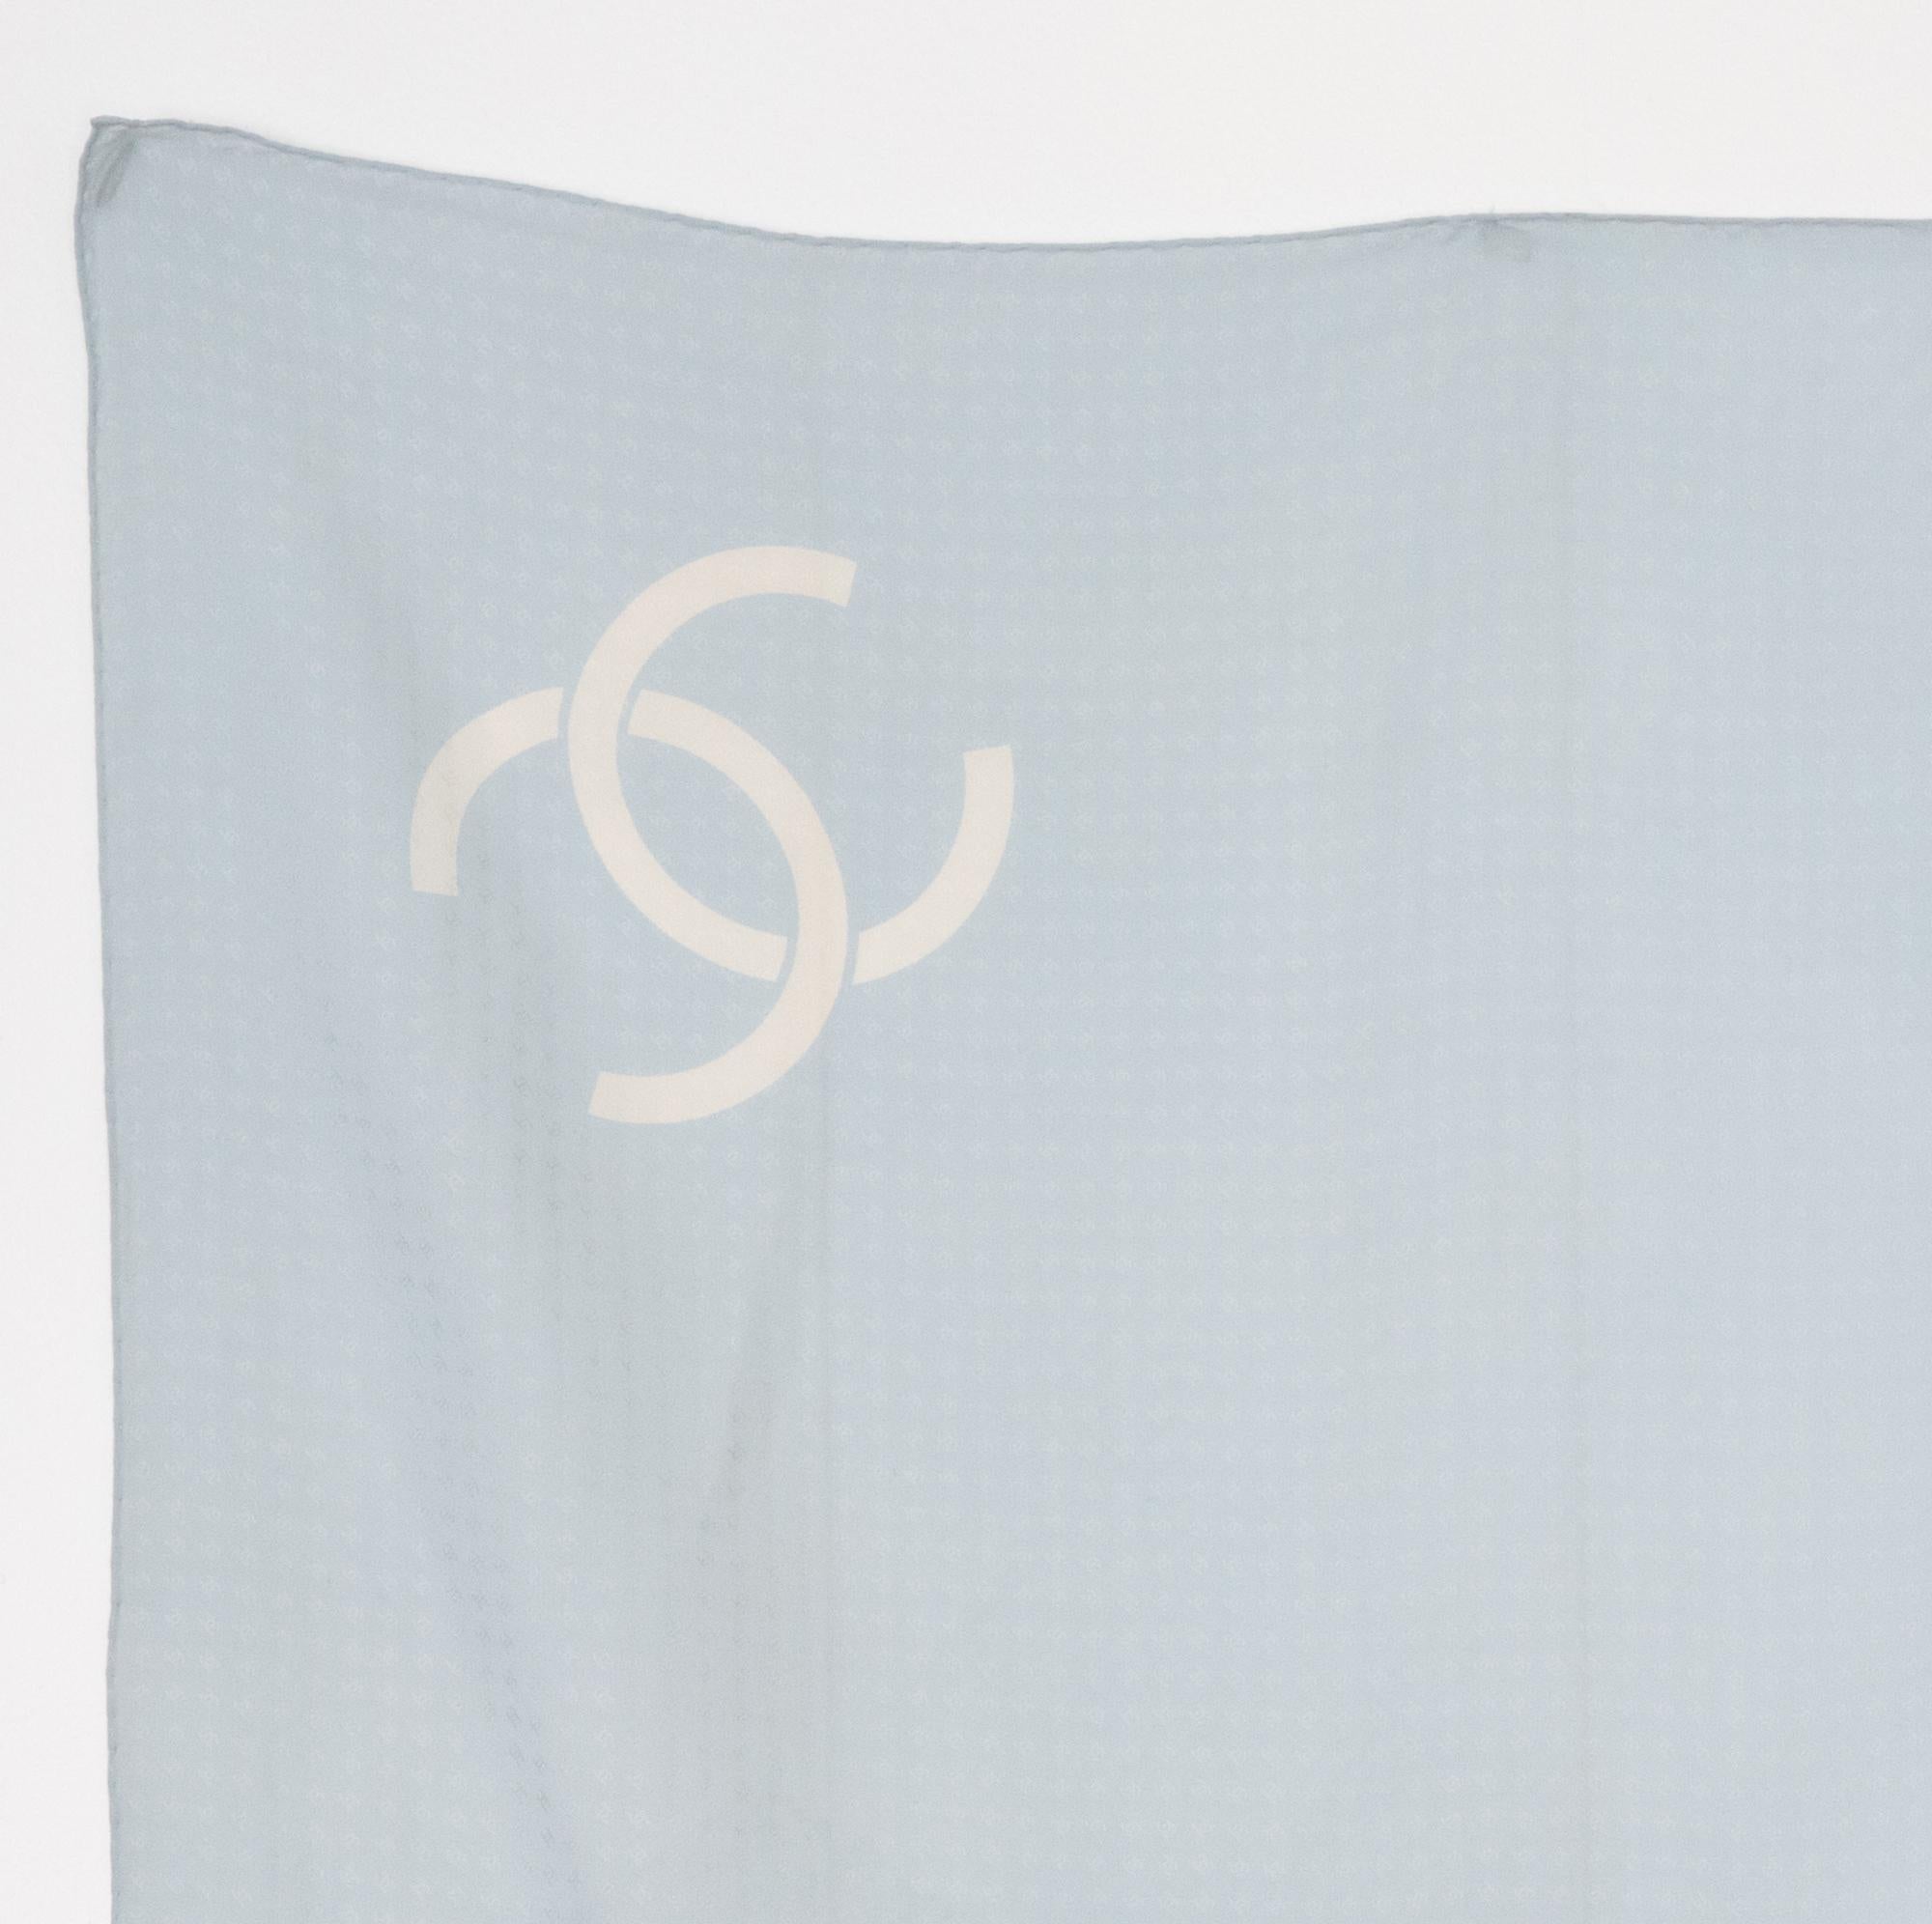 Chanel blue silk scarf  featuring a jacquard ground ivory CC in the four corners.
In good vintage condition. Made in France.
33.8in. (86cm)   X 33.8in. (86cm) 
We guarantee you will receive this  iconic item as described and showed on